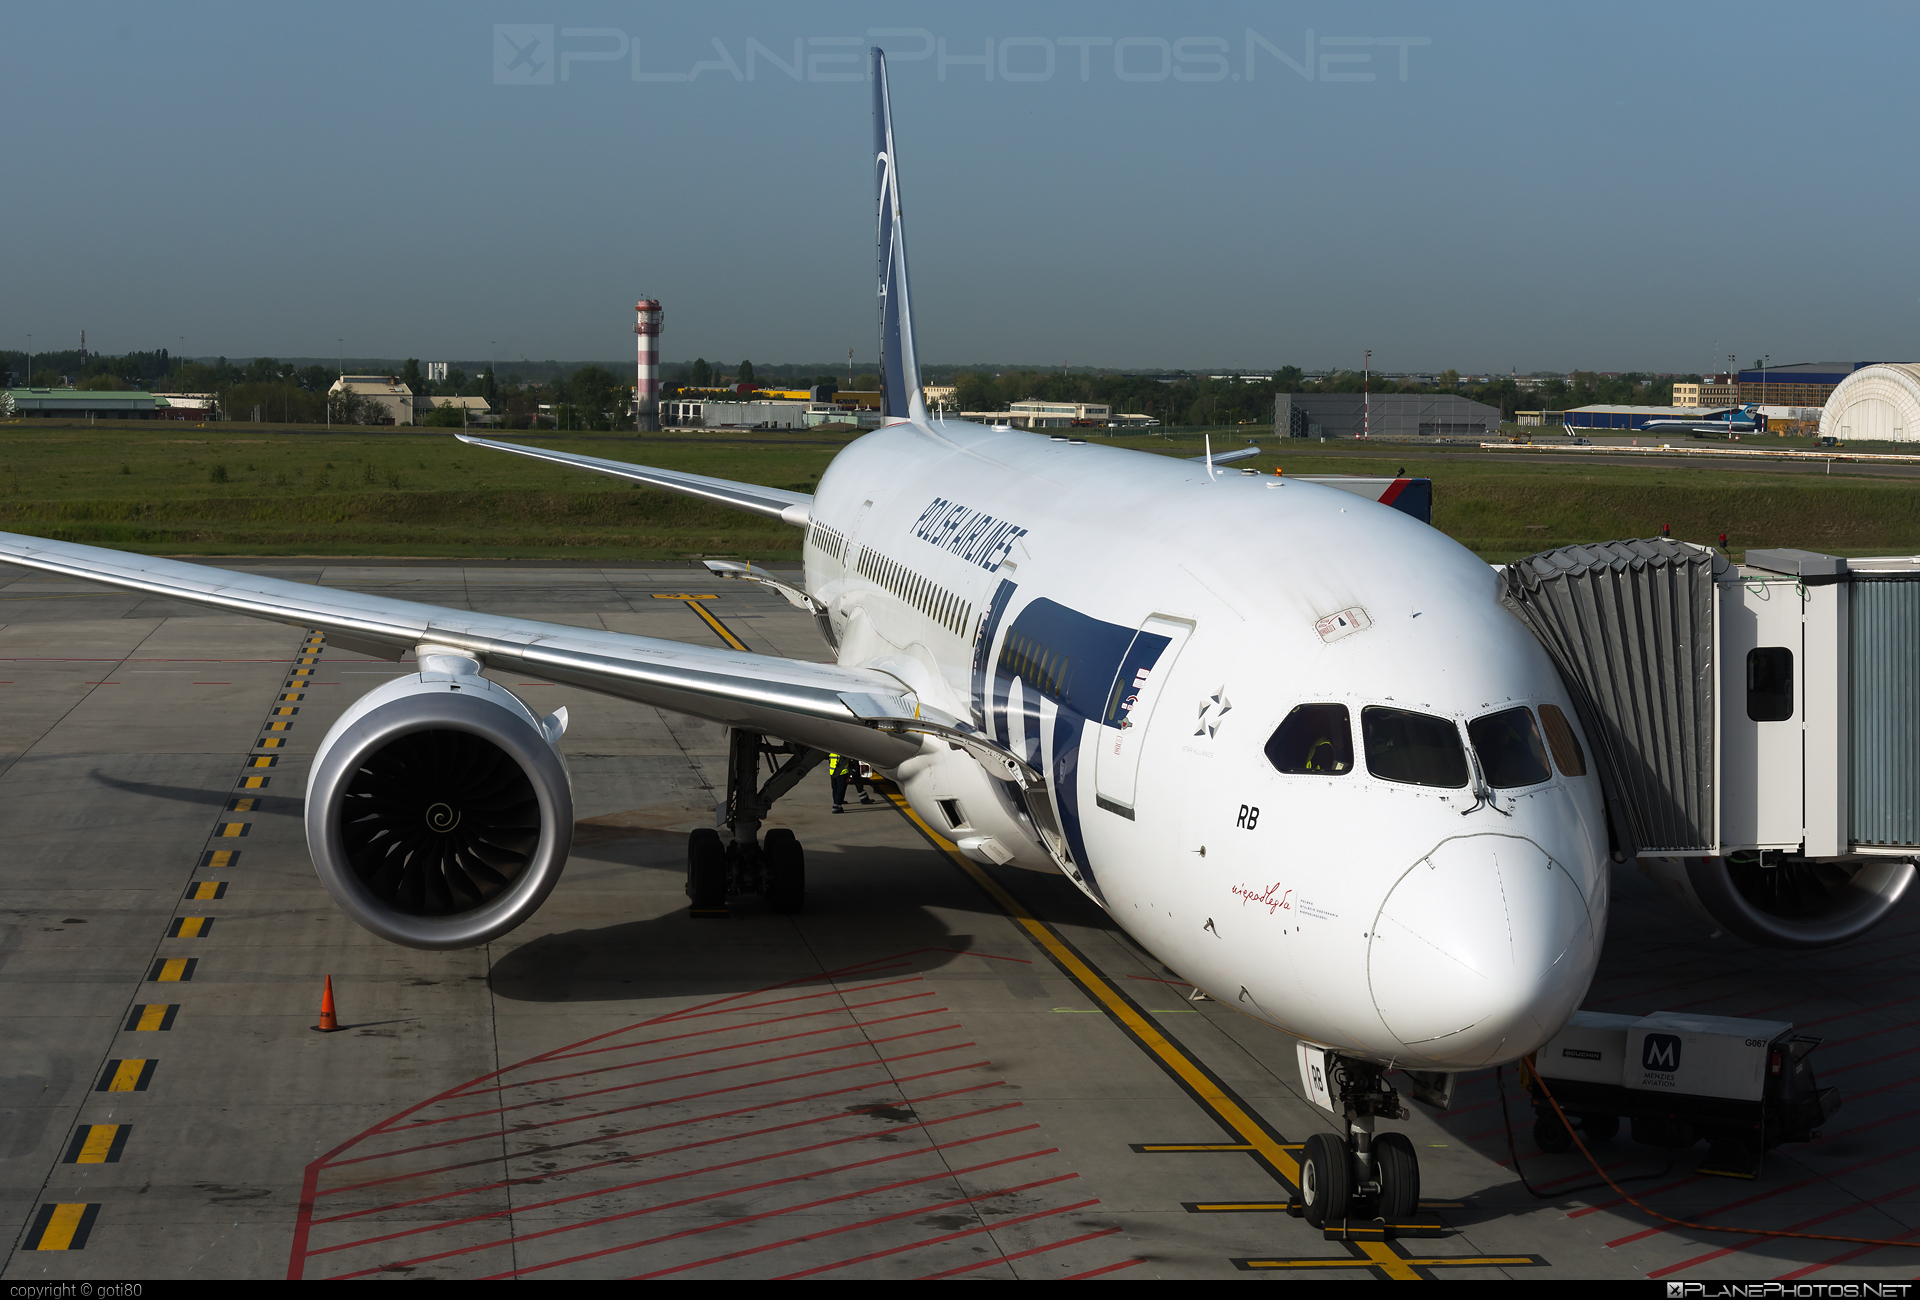 Boeing 787-8 Dreamliner - SP-LRB operated by LOT Polish Airlines #b787 #boeing #boeing787 #dreamliner #lot #lotpolishairlines